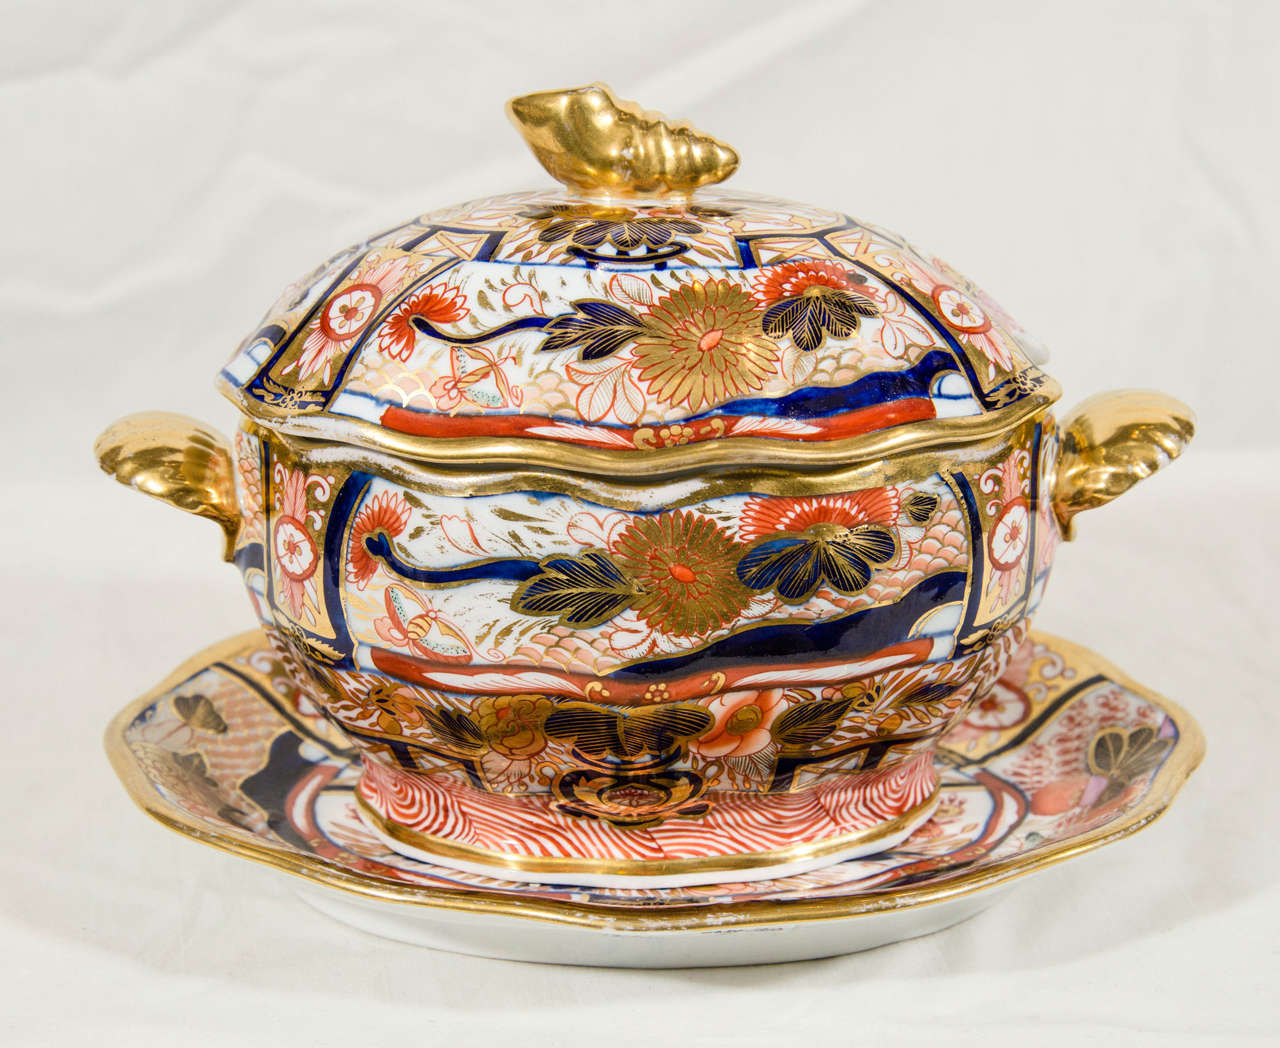 Decorated with cobalt blue and iron red in the richly gilded 